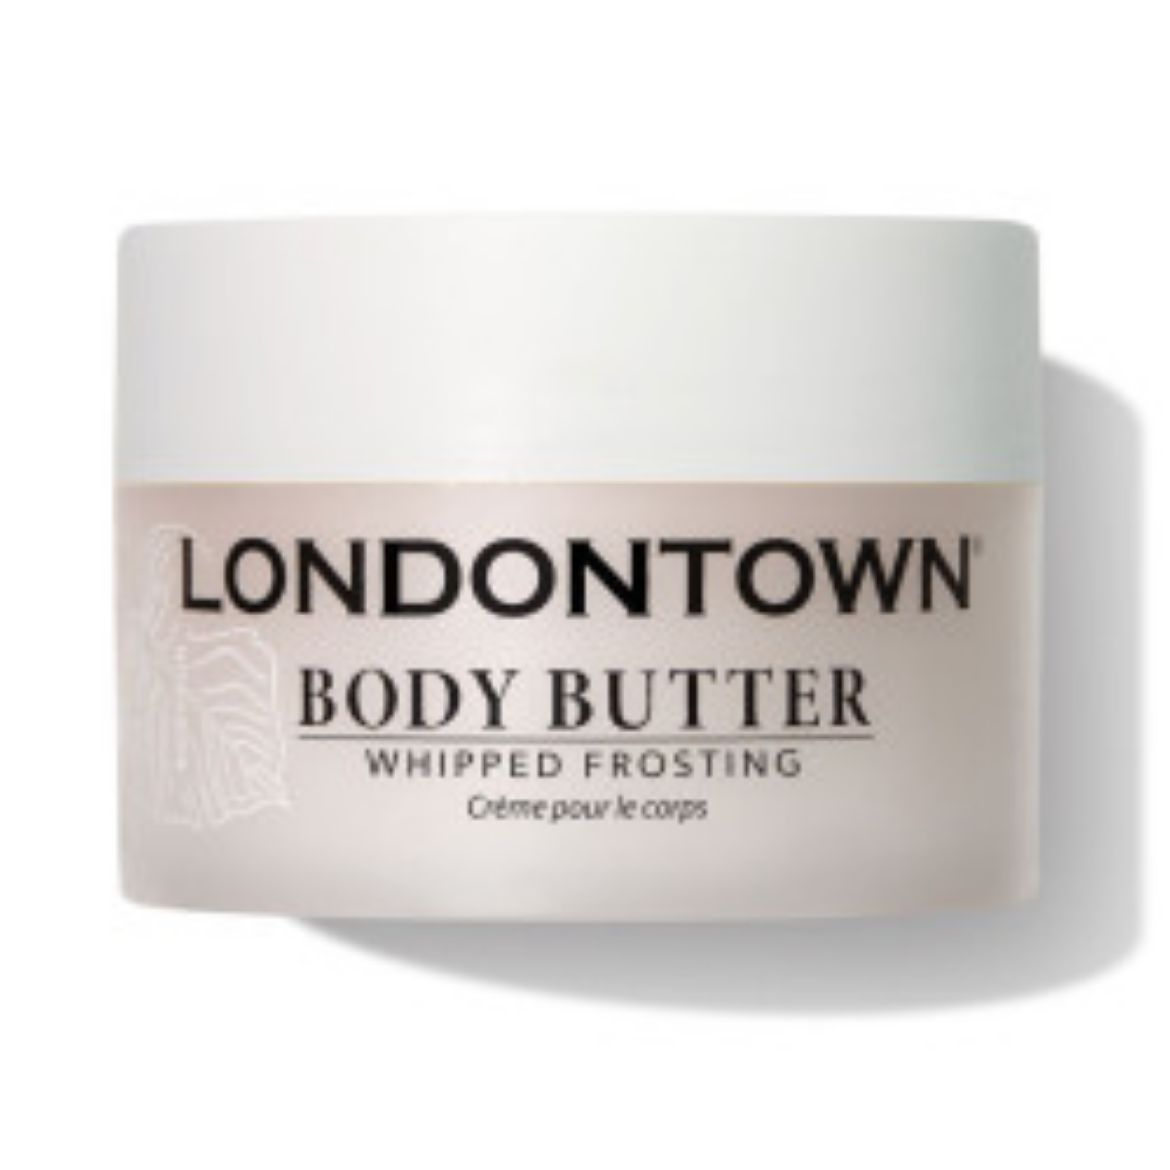 Immagine di LondonTown Whipped Frosting Body Butter